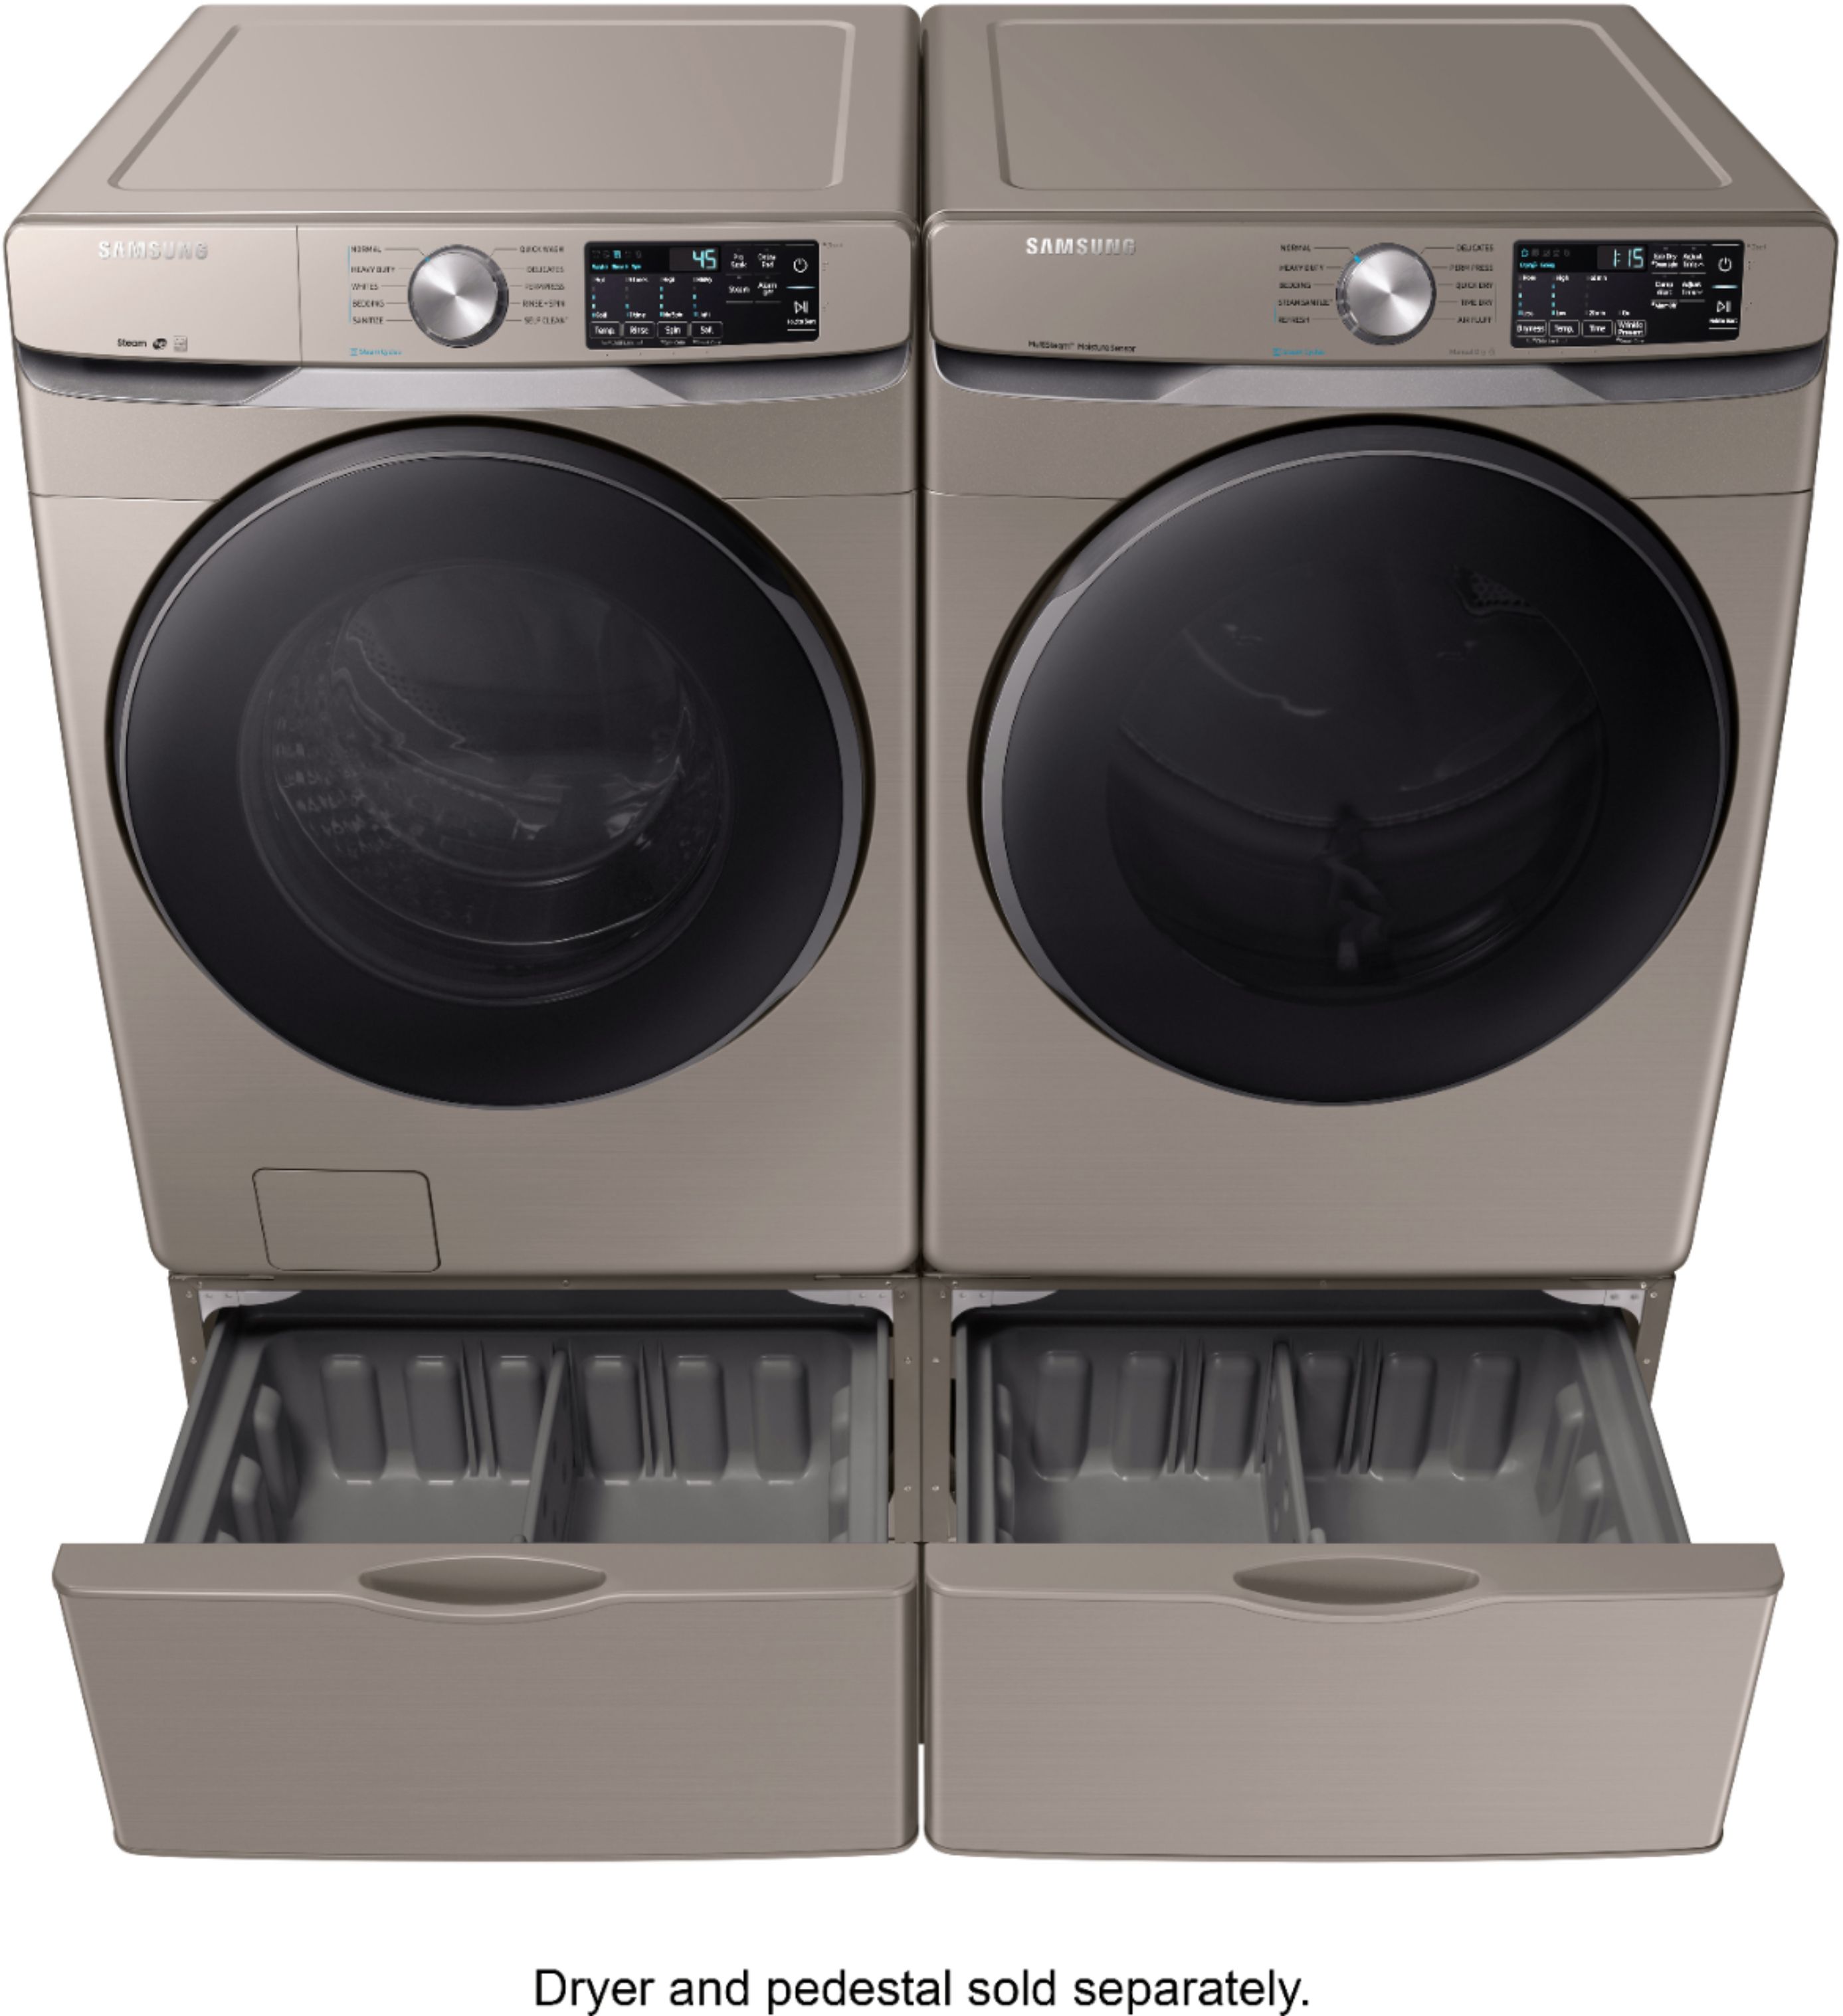 Samsung - 4.5 cu. ft. High Efficiency Stackable Front Load Washer with